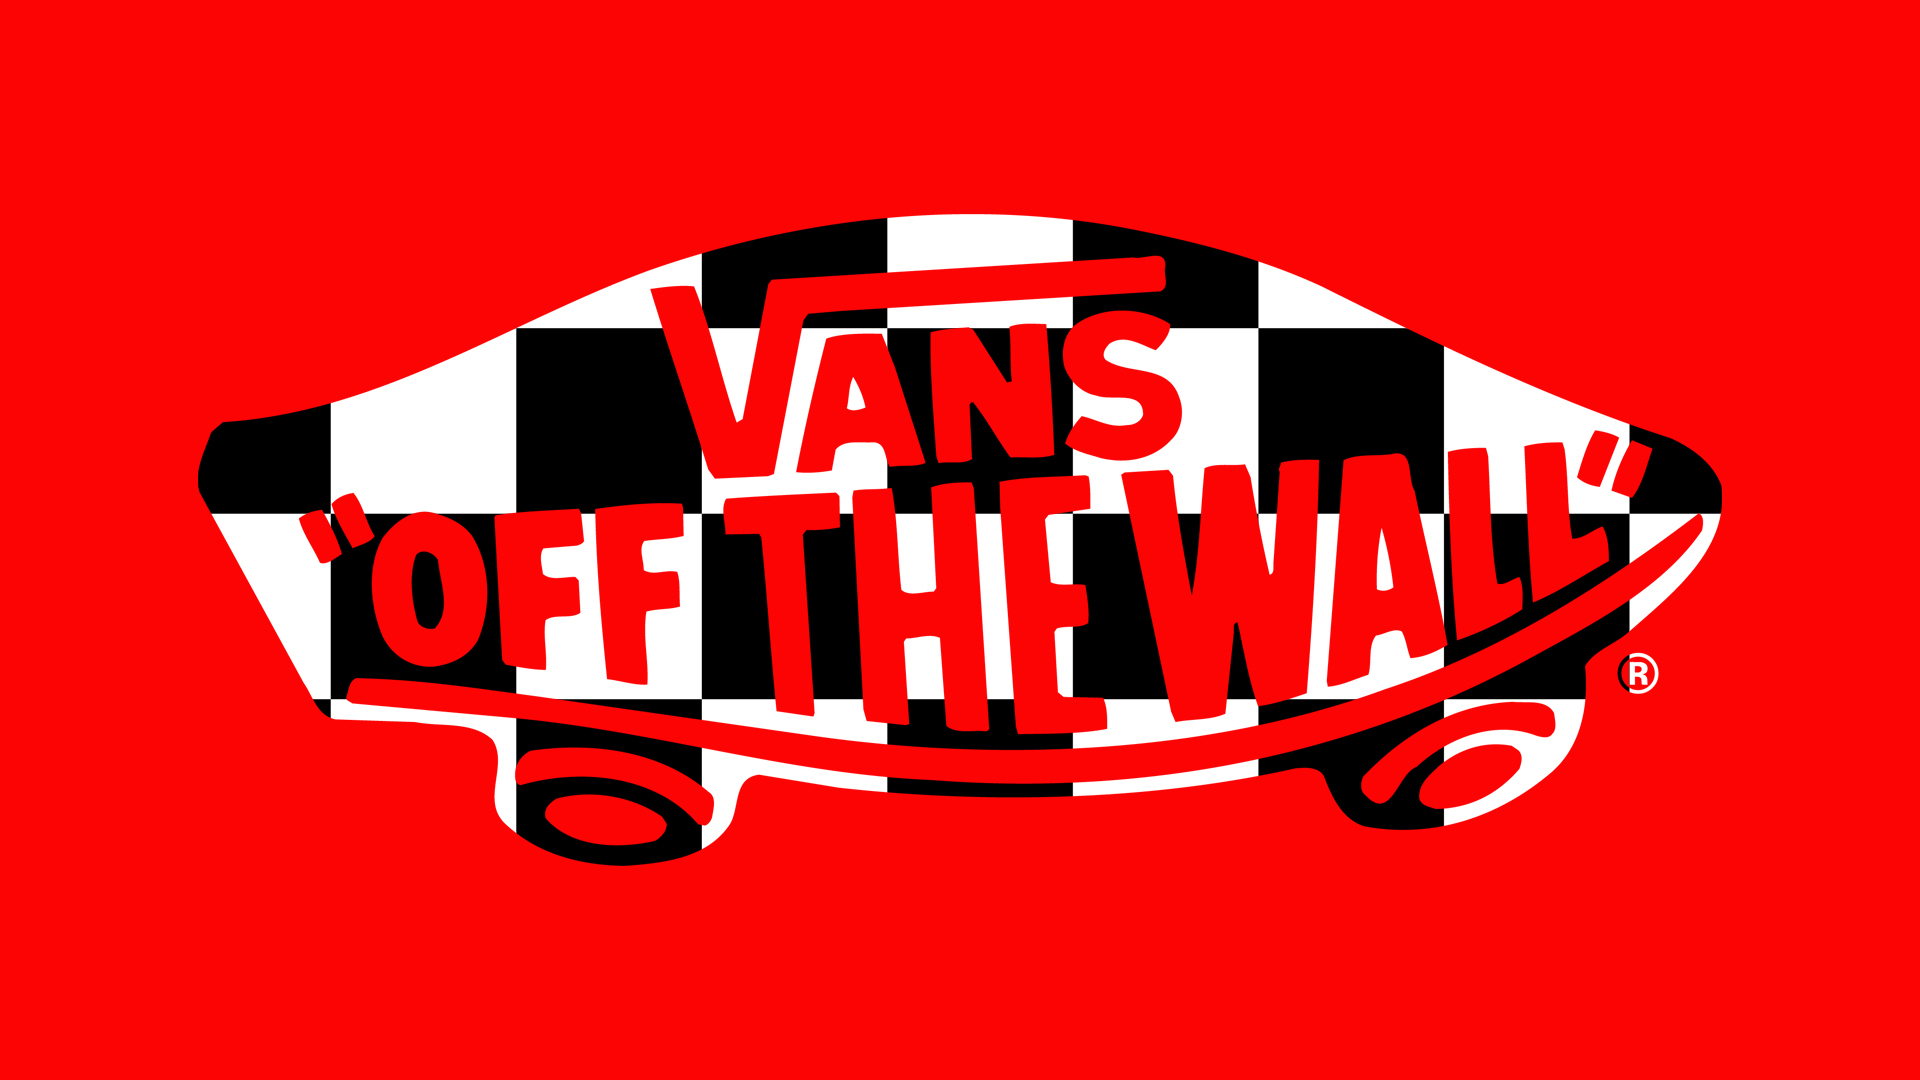 products, vans, logo, red